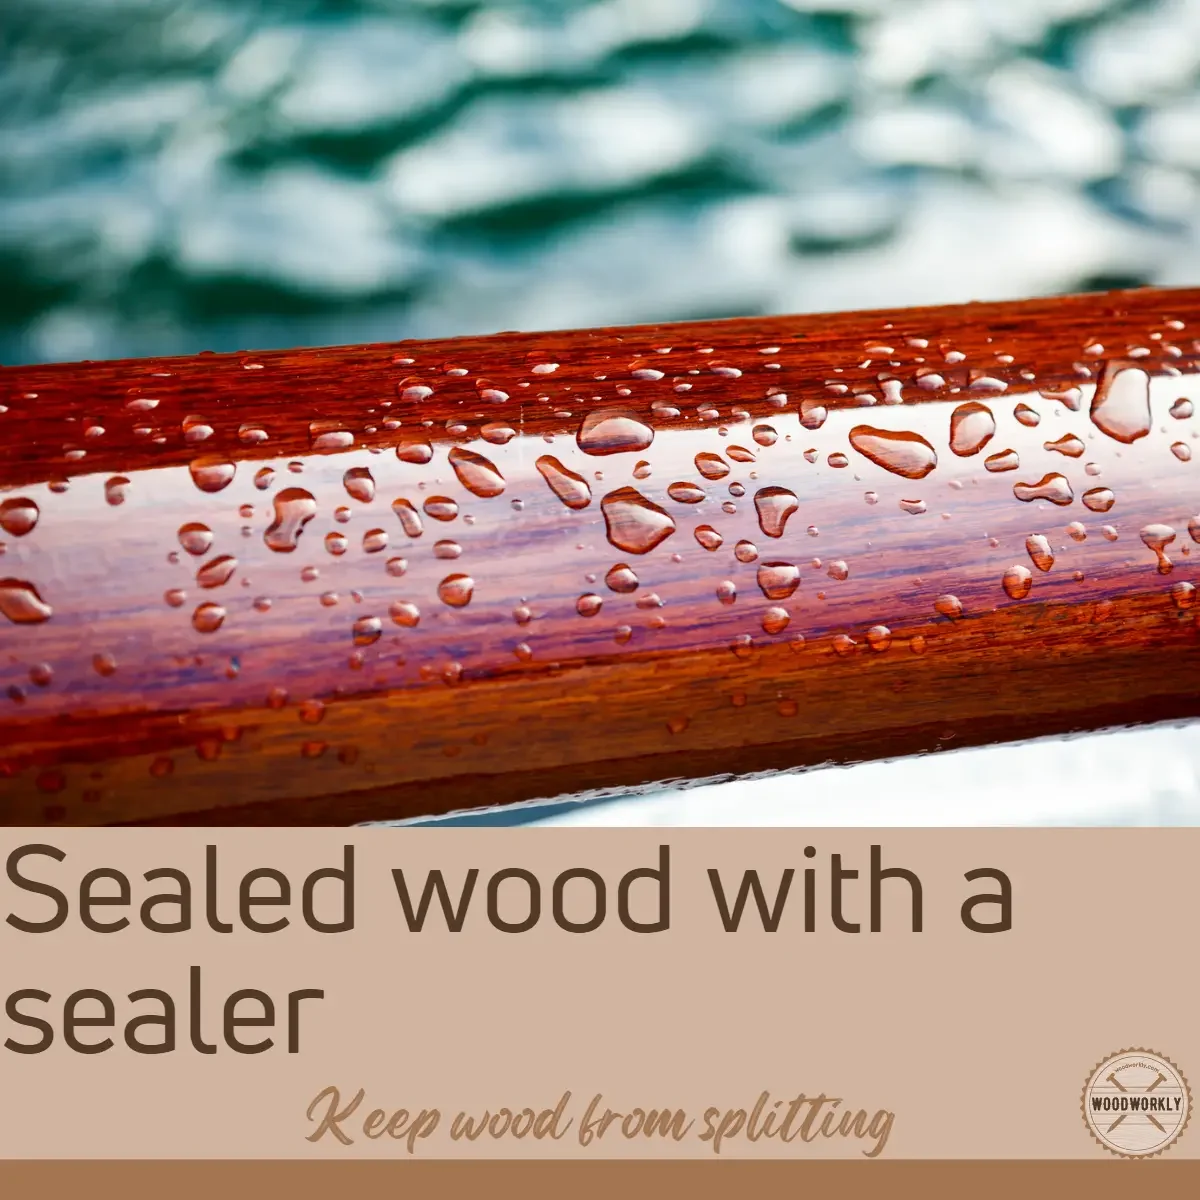 Sealed wood with a sealer